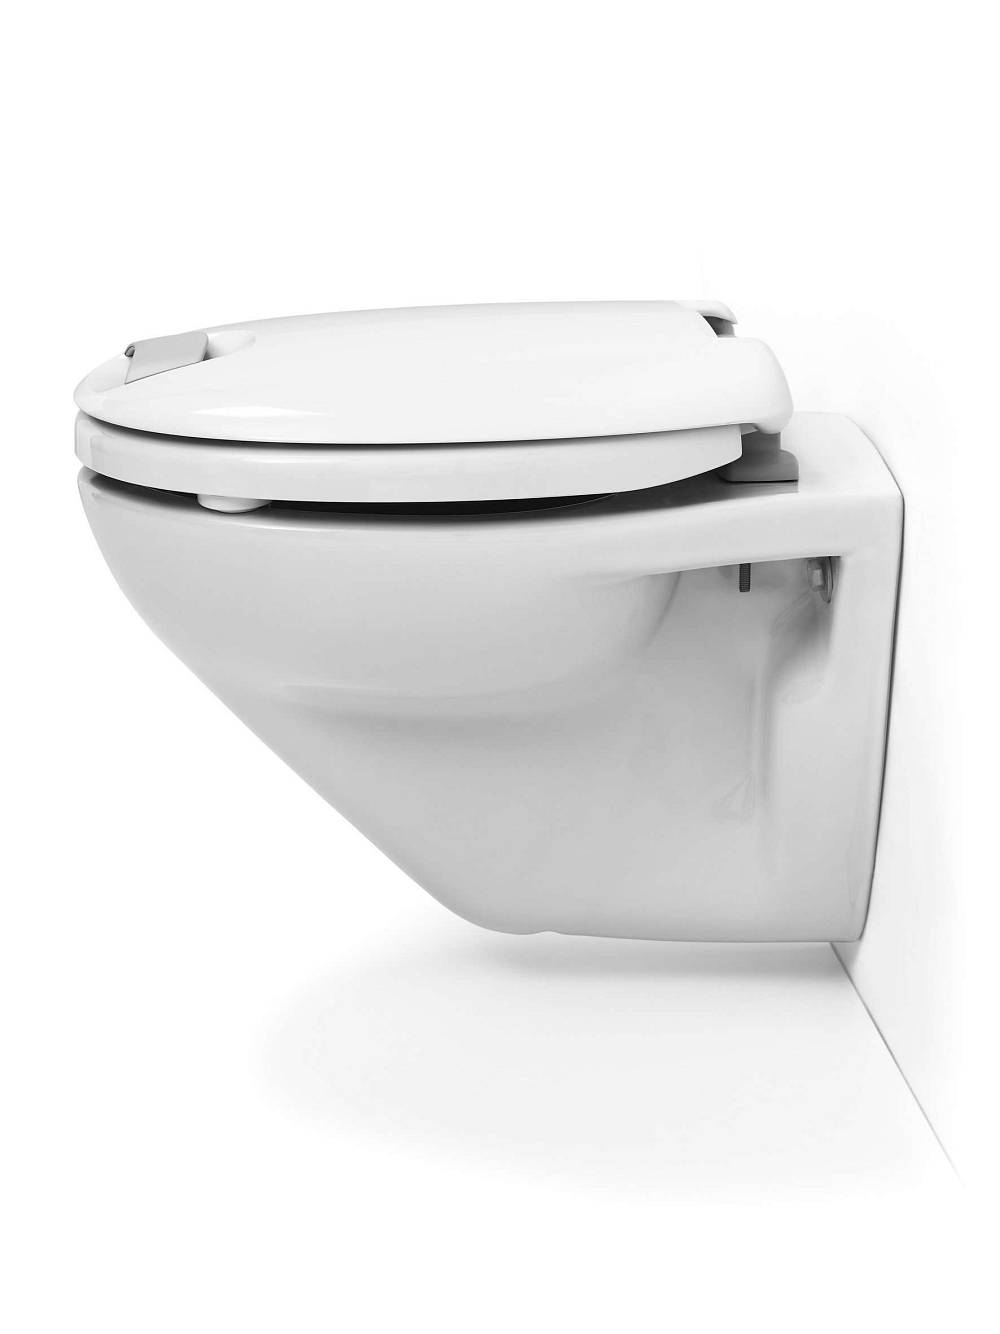 Raised toilet seat from HAROMED with closed lid.